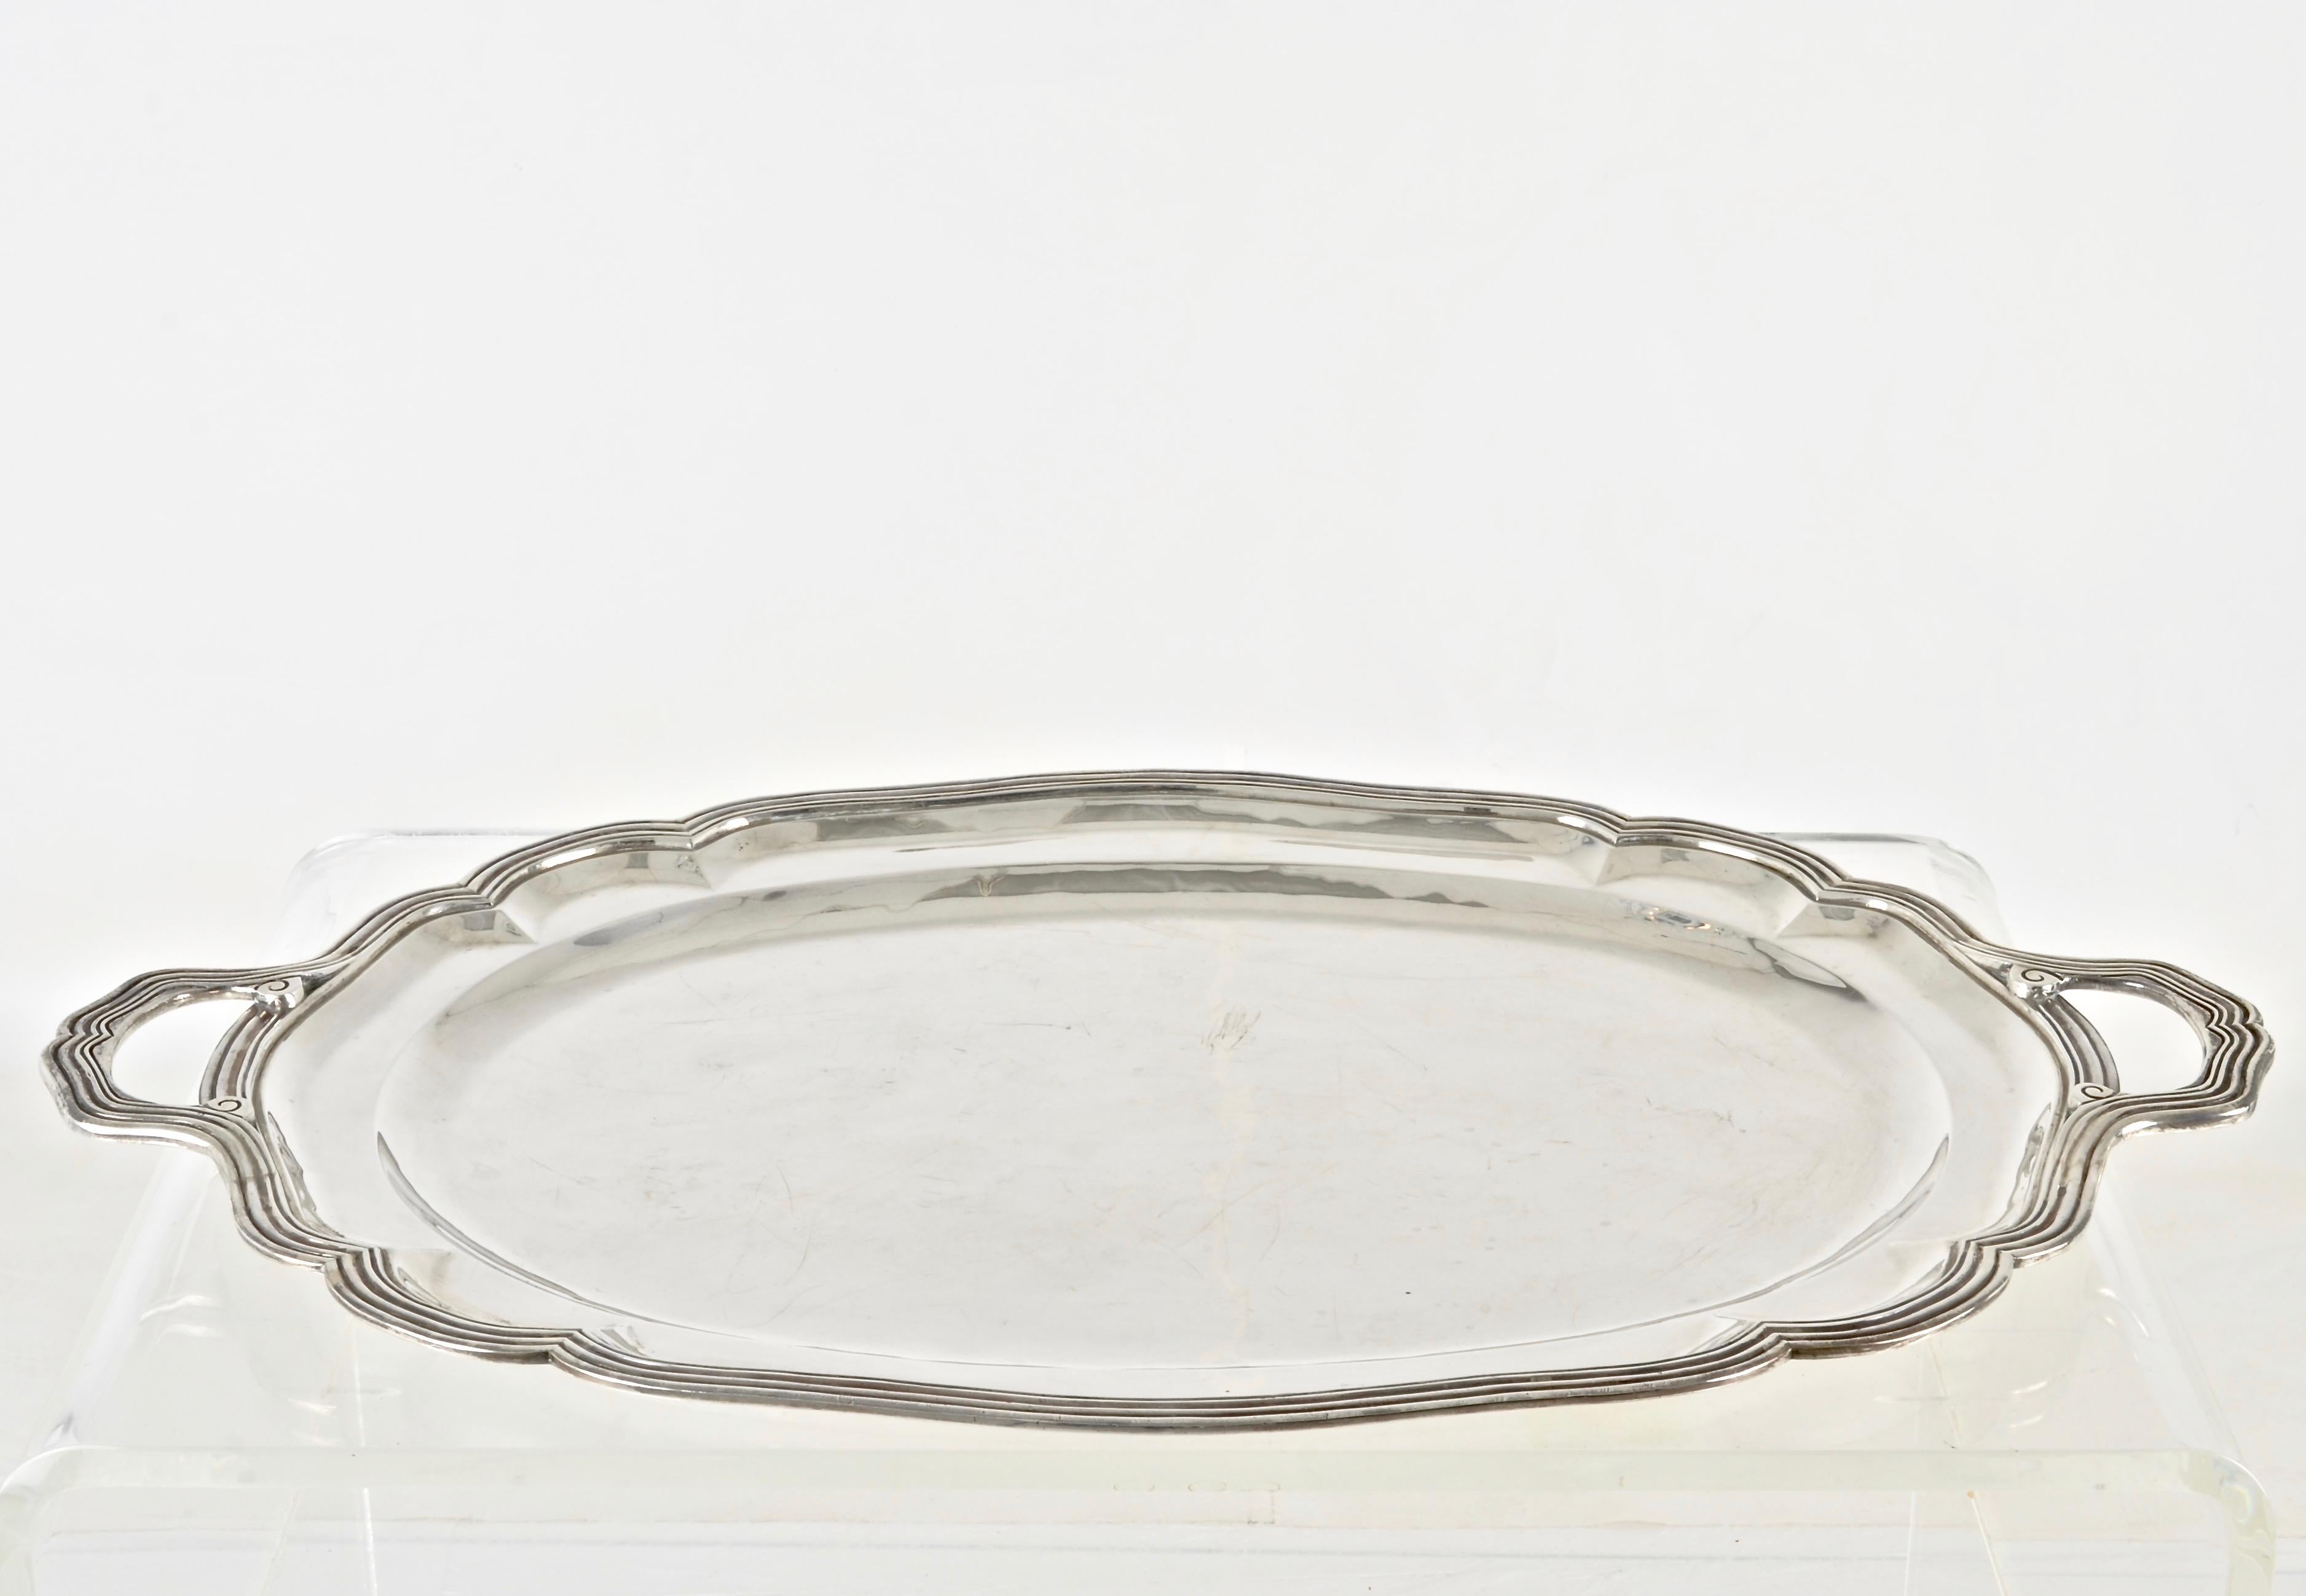 Handcrafted Mexican tray with sturdy handles. Simple and handsome design. Impressive proportions and weight. Makers stamp on verso: Sanborns Mexican Sterling.